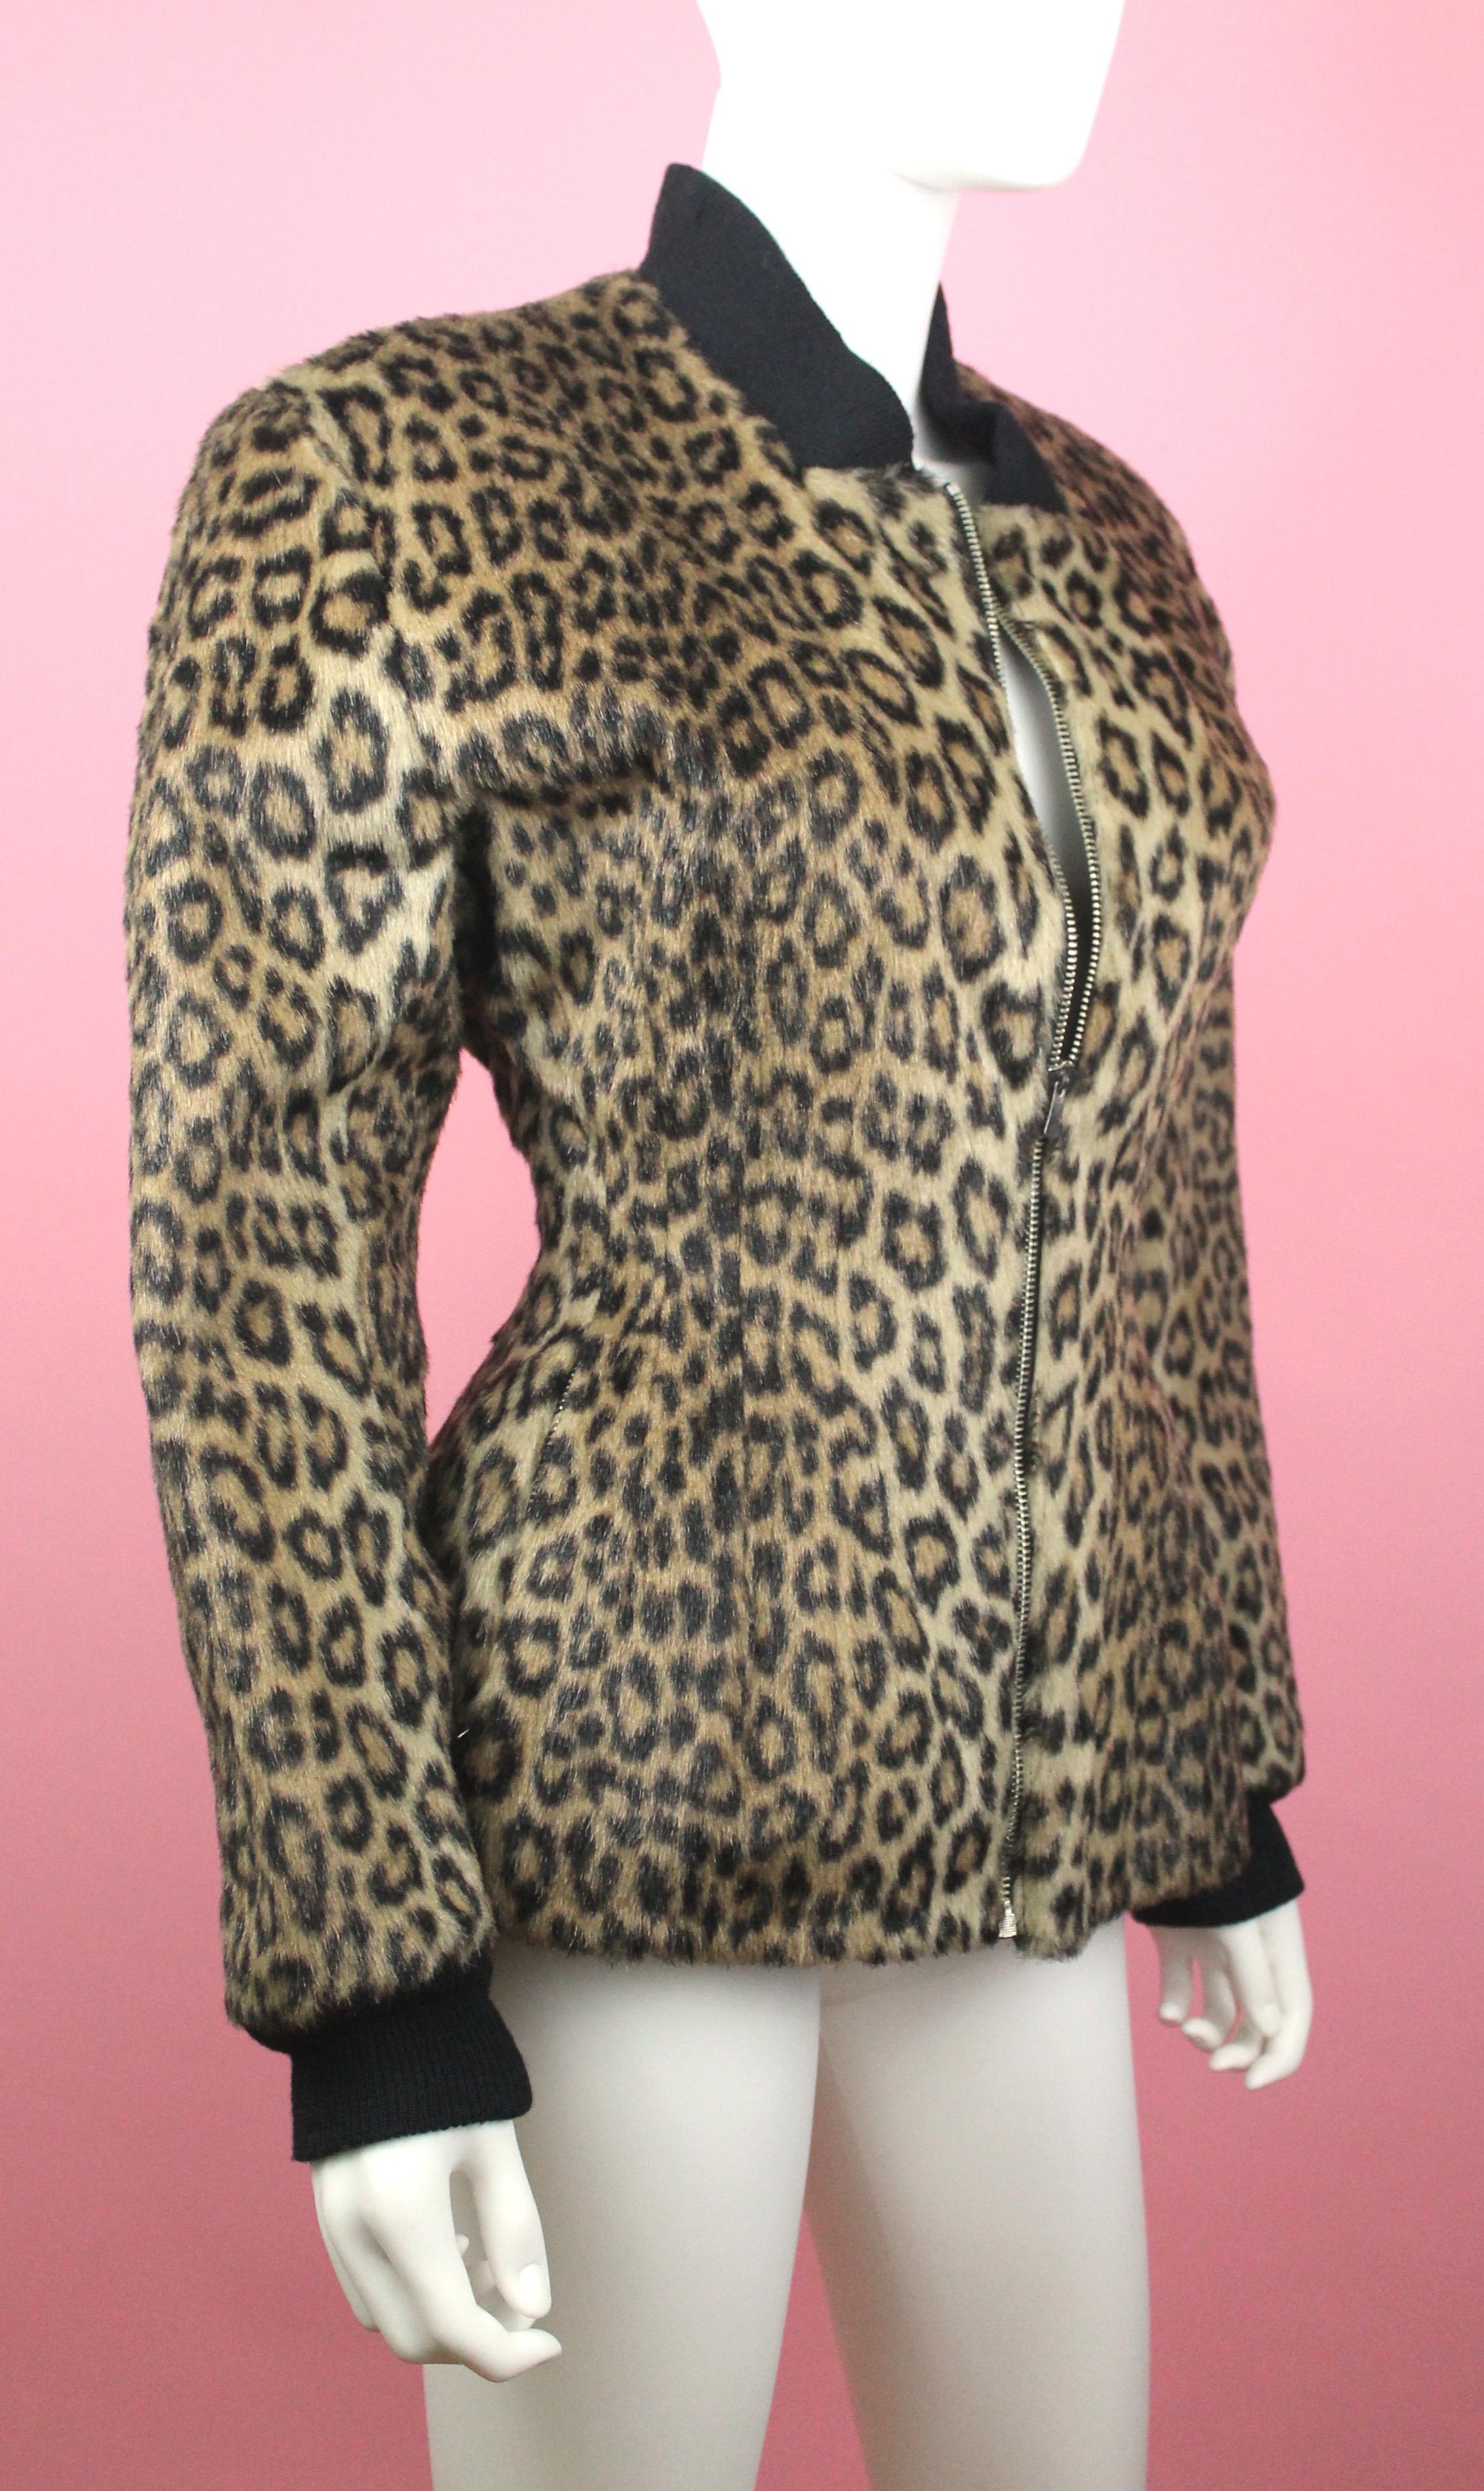 -Beautiful faux leopard fur jacket from Jean Paul Gaultier pour Gibo
-Has shaped waist, black ribbed cuffs and neck, 2 waist pockets 
-Black quilted lining 
-Made in Italy 

Approximate Measurements
-Total length: 27